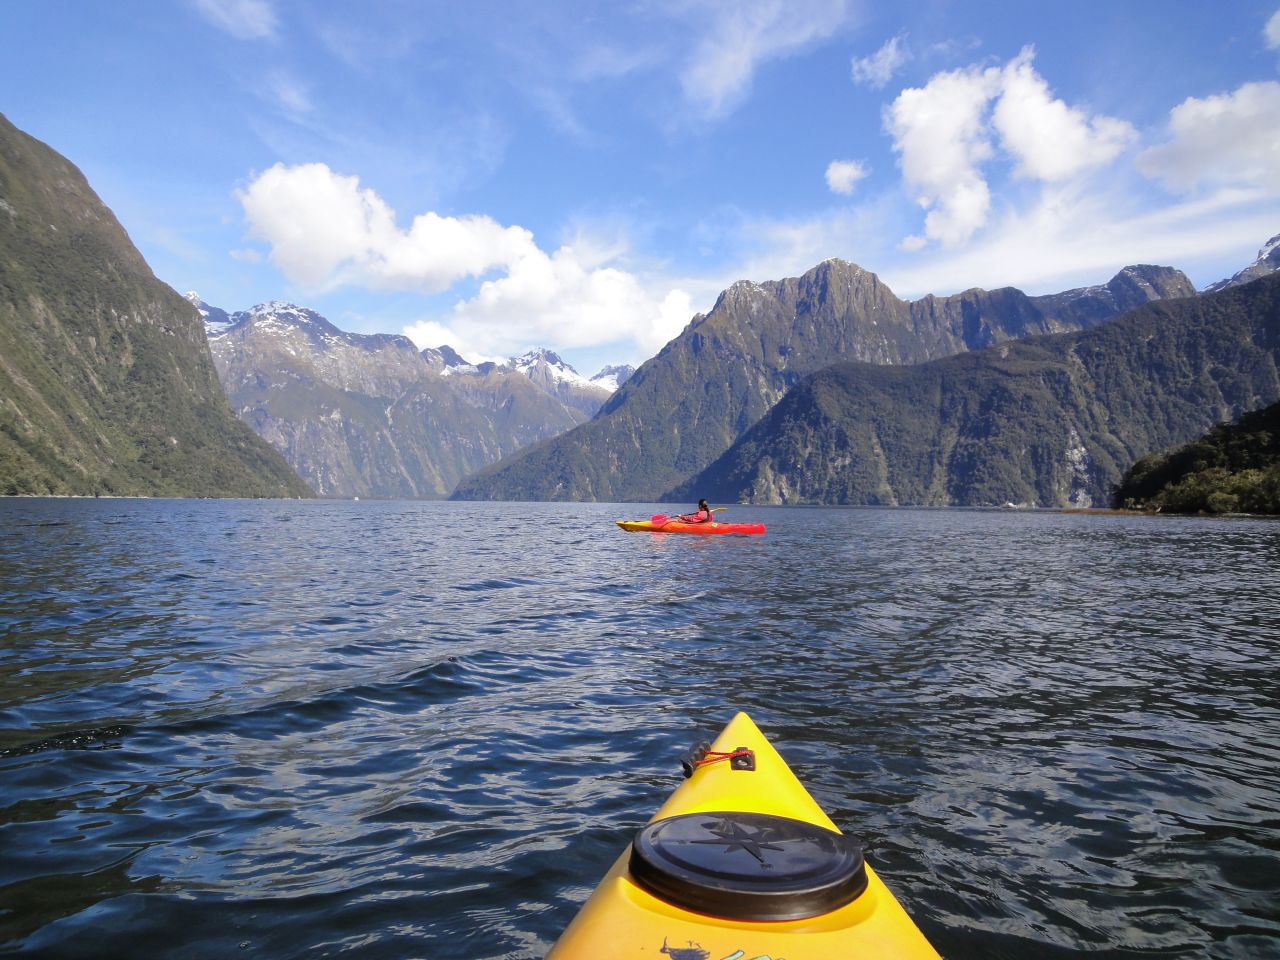 Tucked away in <a href="http://ireport.cnn.com/docs/DOC-1220194">Fiordland National Park</a>, travelers can kayak through its cool waters and get another perspective of the South Island's mountains and forests. 